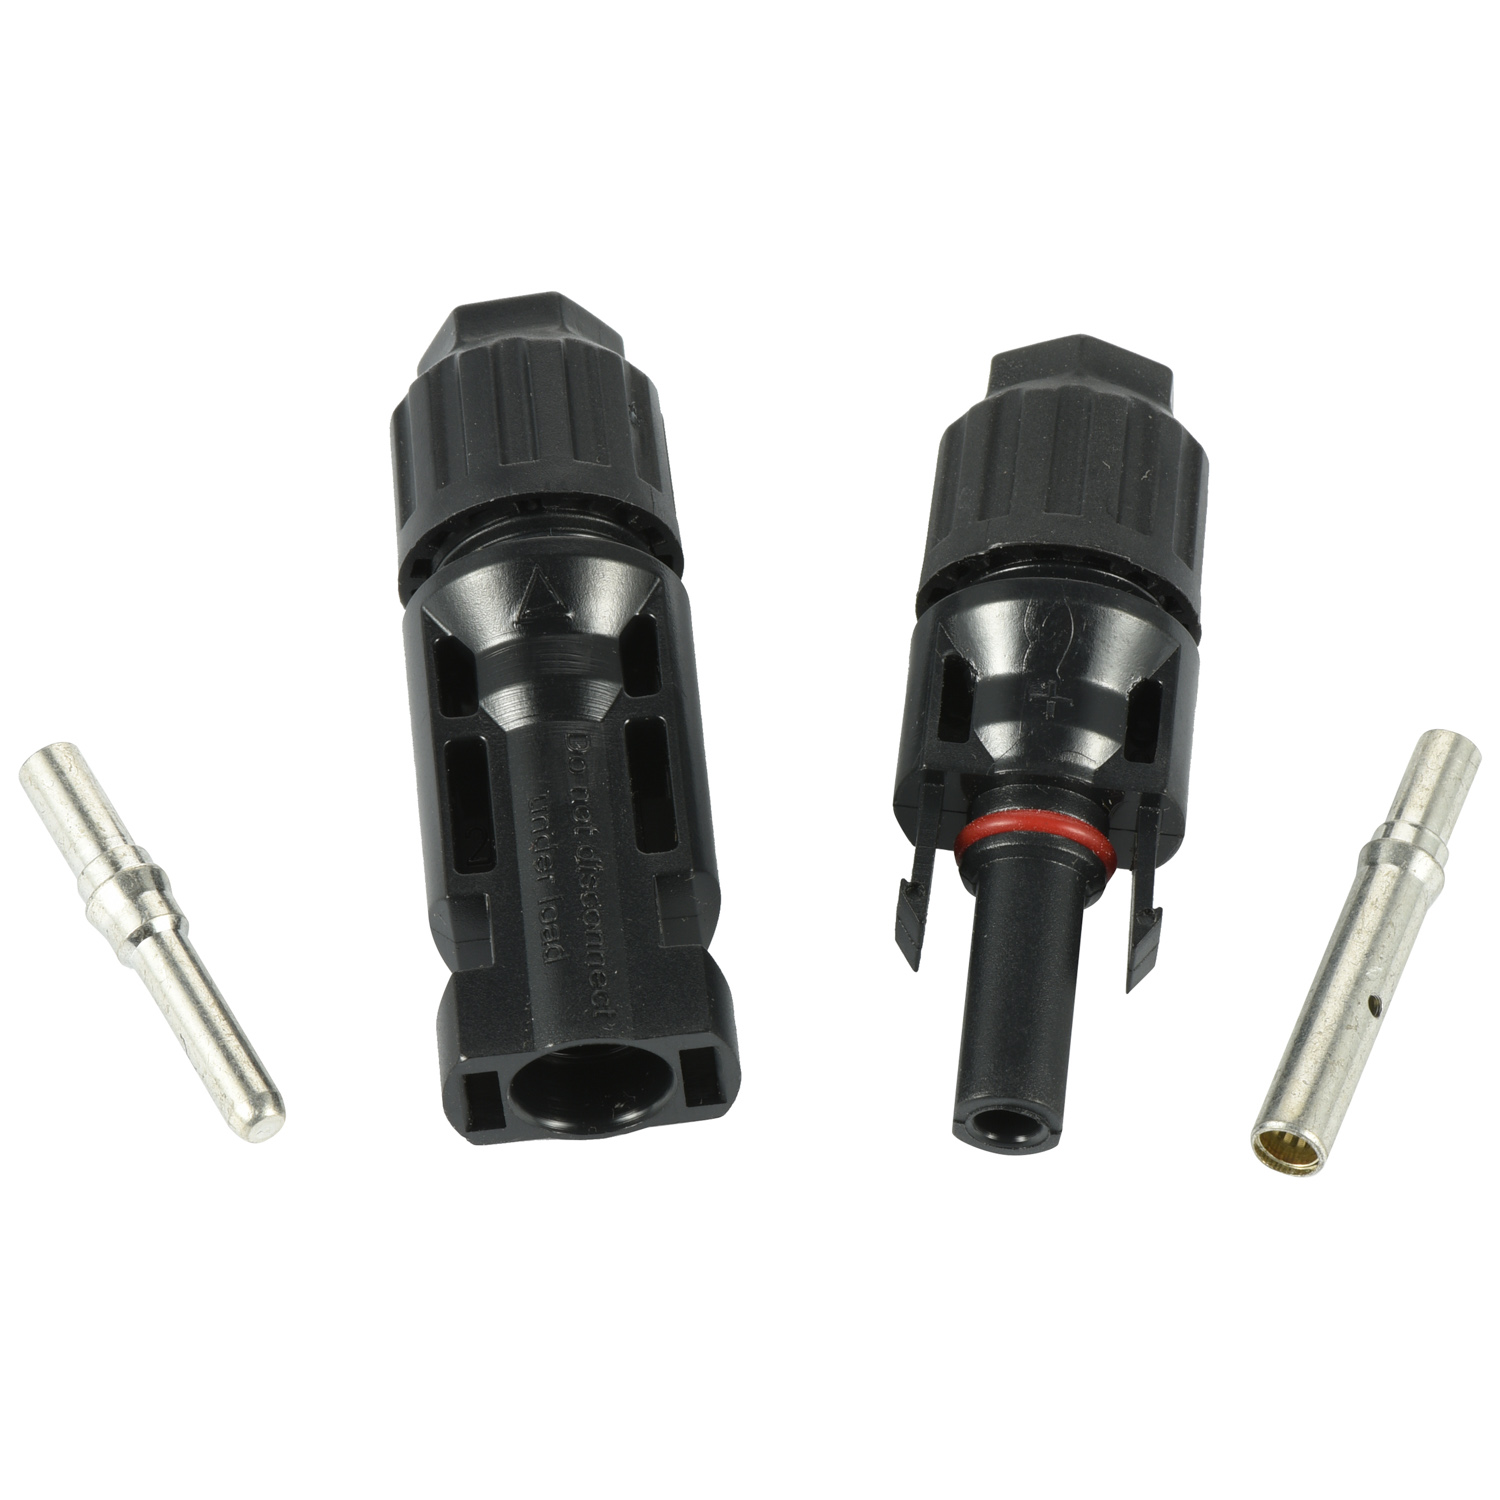 Hexagon Nut MC4 Connector Adaptor Coupler TUV UL Approved for 2.5/4/6/10mm2 14A/12/10/8AWG Solar PV Cable System